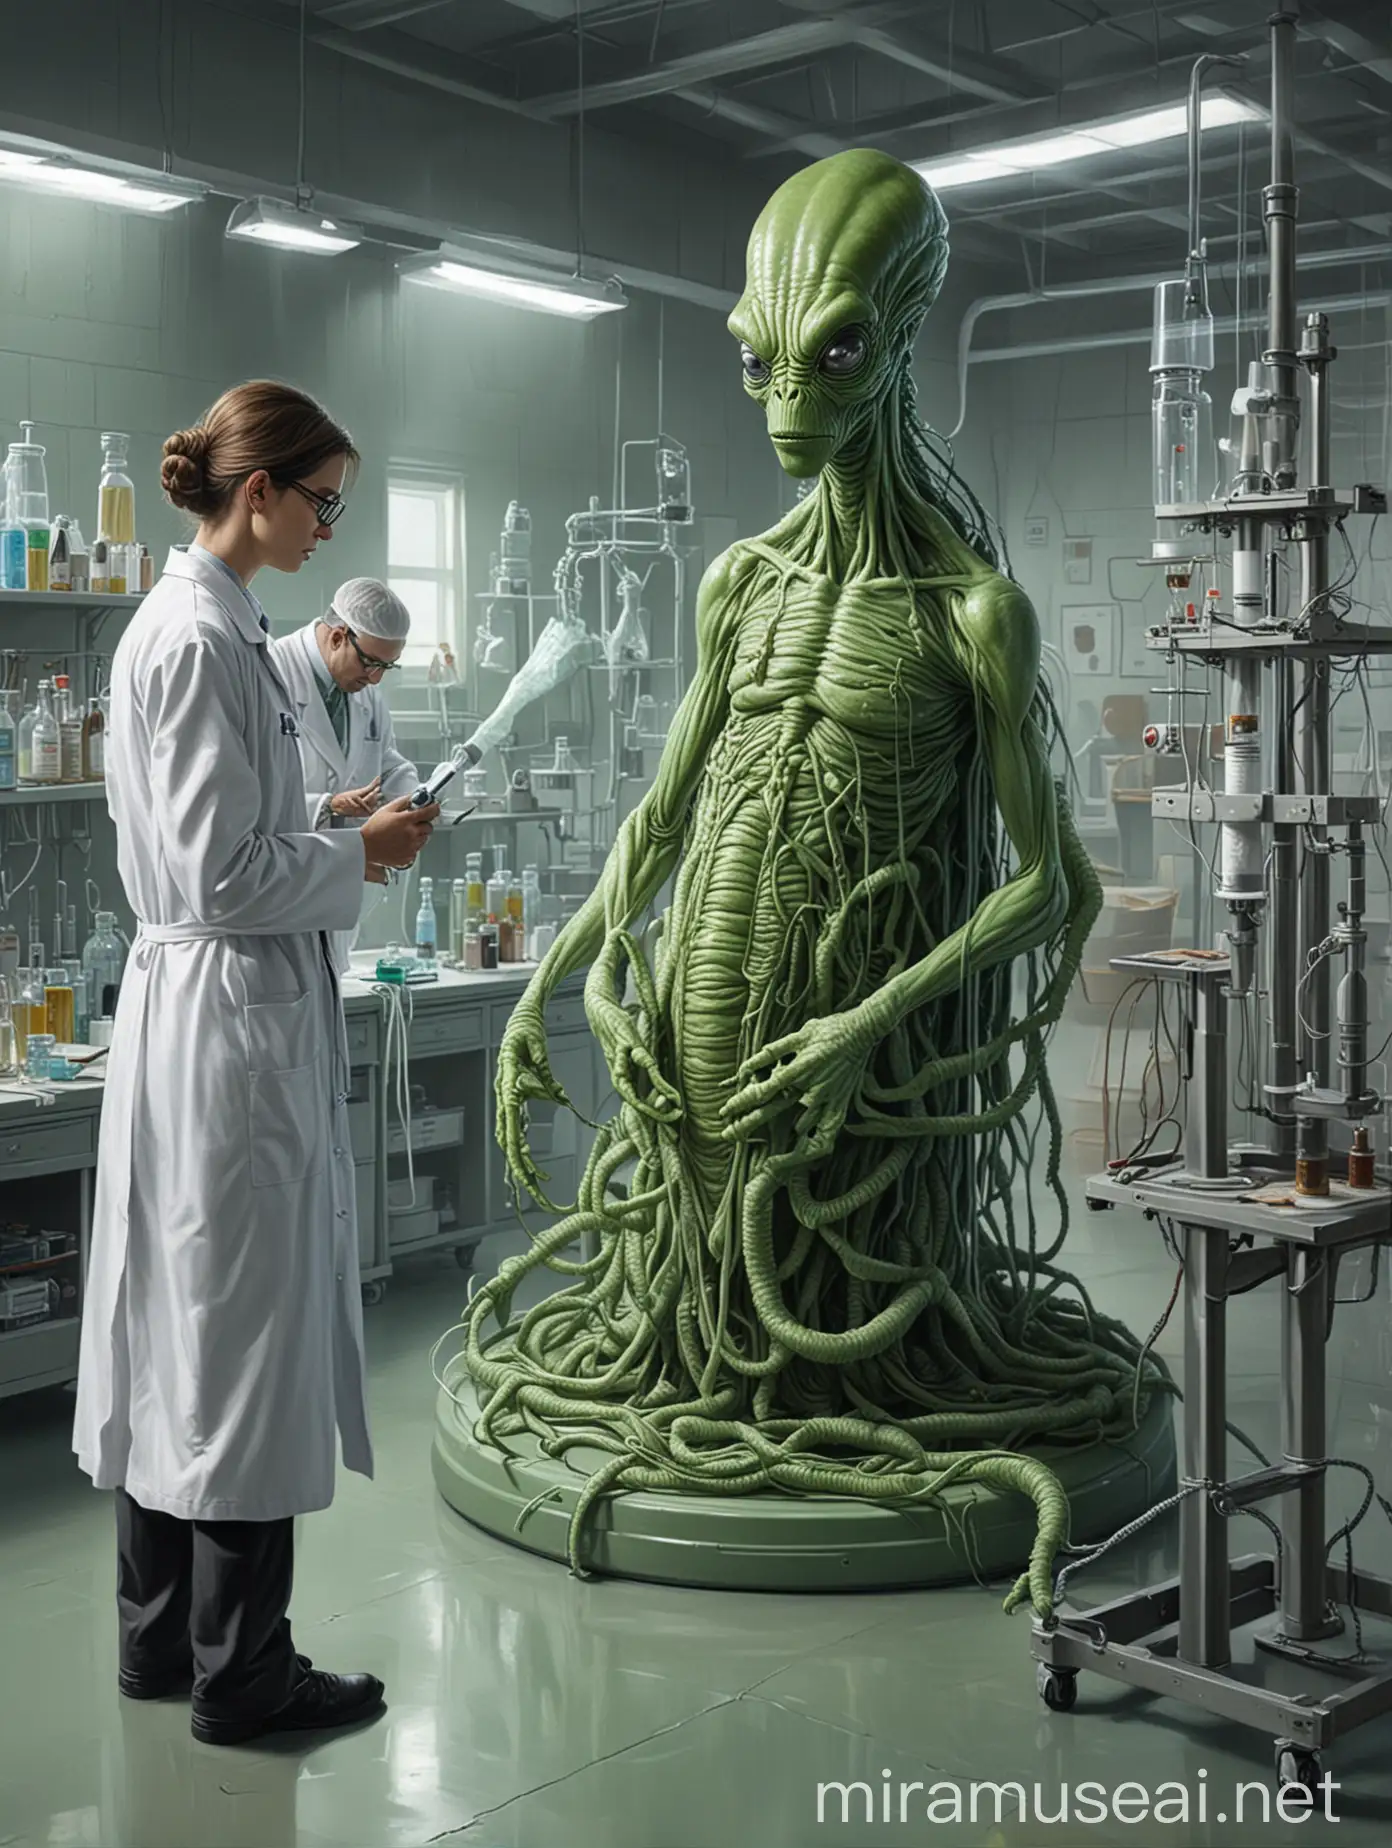 Highly detailed painting, wide view, two scientists in white coats stand behind a green alien creature tied to a laboratory stand, use muted colors only, high quality